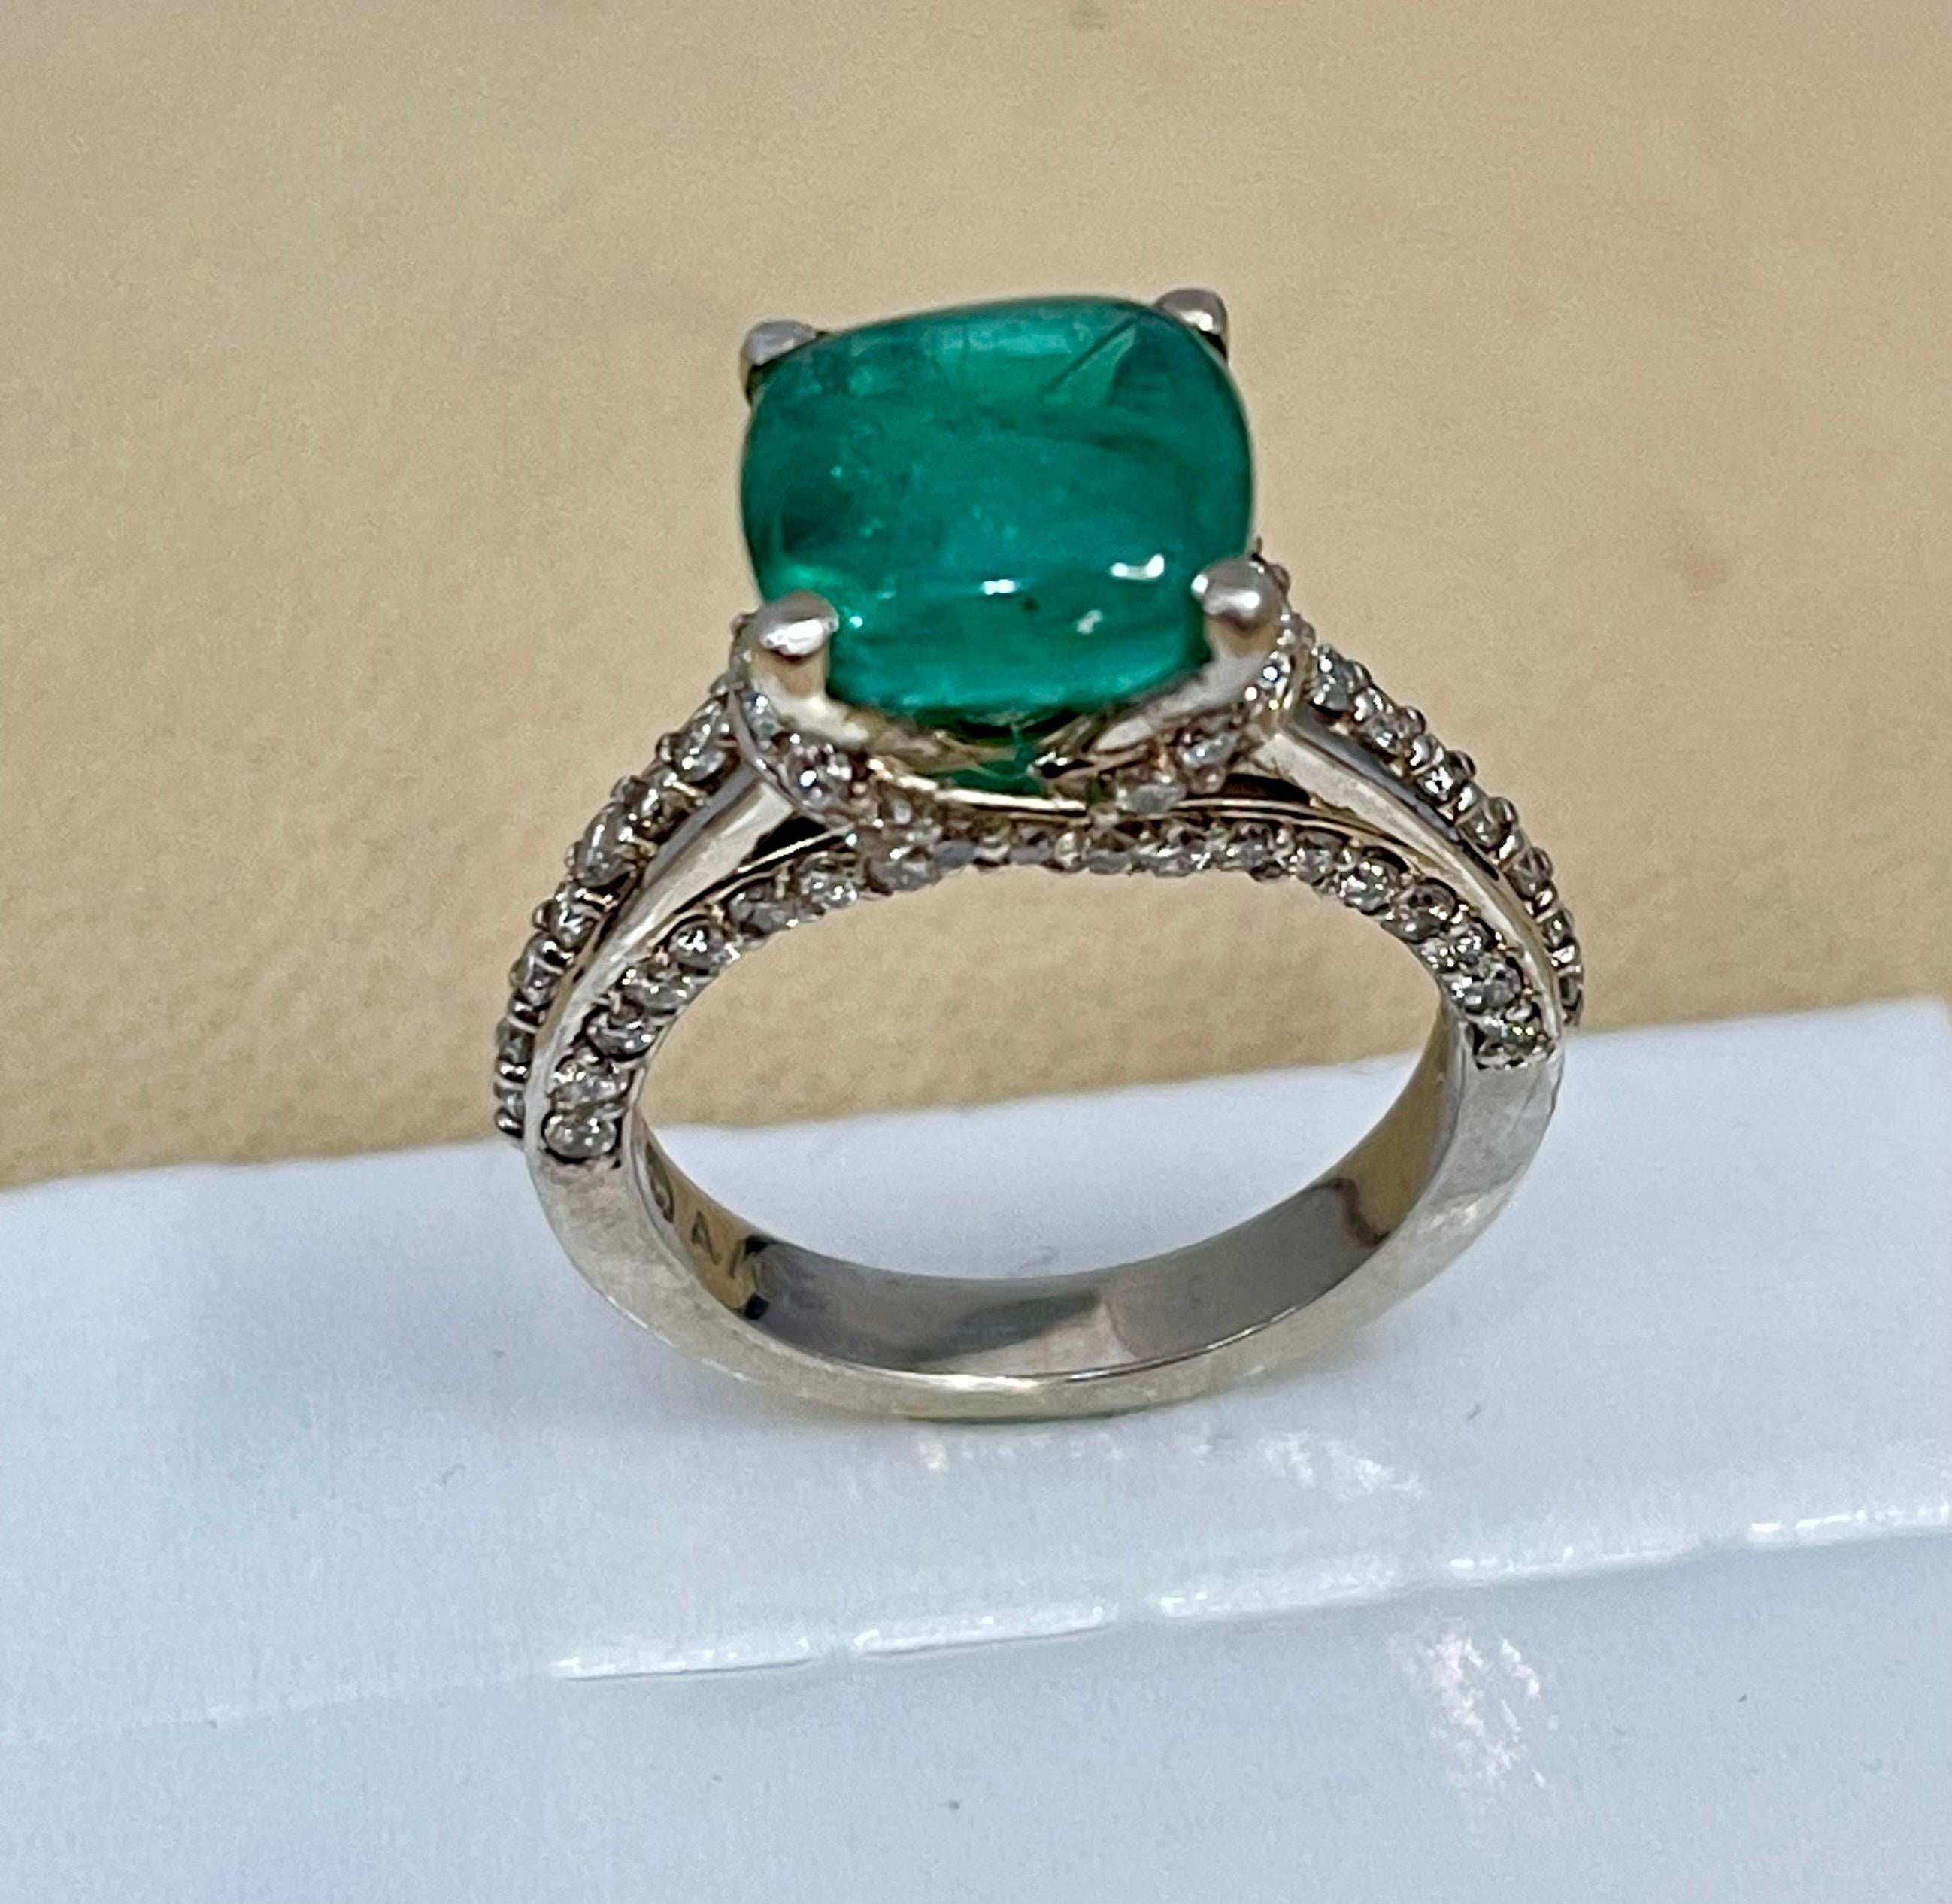 A classic, Cocktail ring 
i am selling this ring at a very reasonable price.
Approximately  3 Carat Natural Cushion Cabochon Emerald & Diamond Ring 14 Karat White Gold size 6.5
Intense green color, Beautiful stone with shine and luster  but has